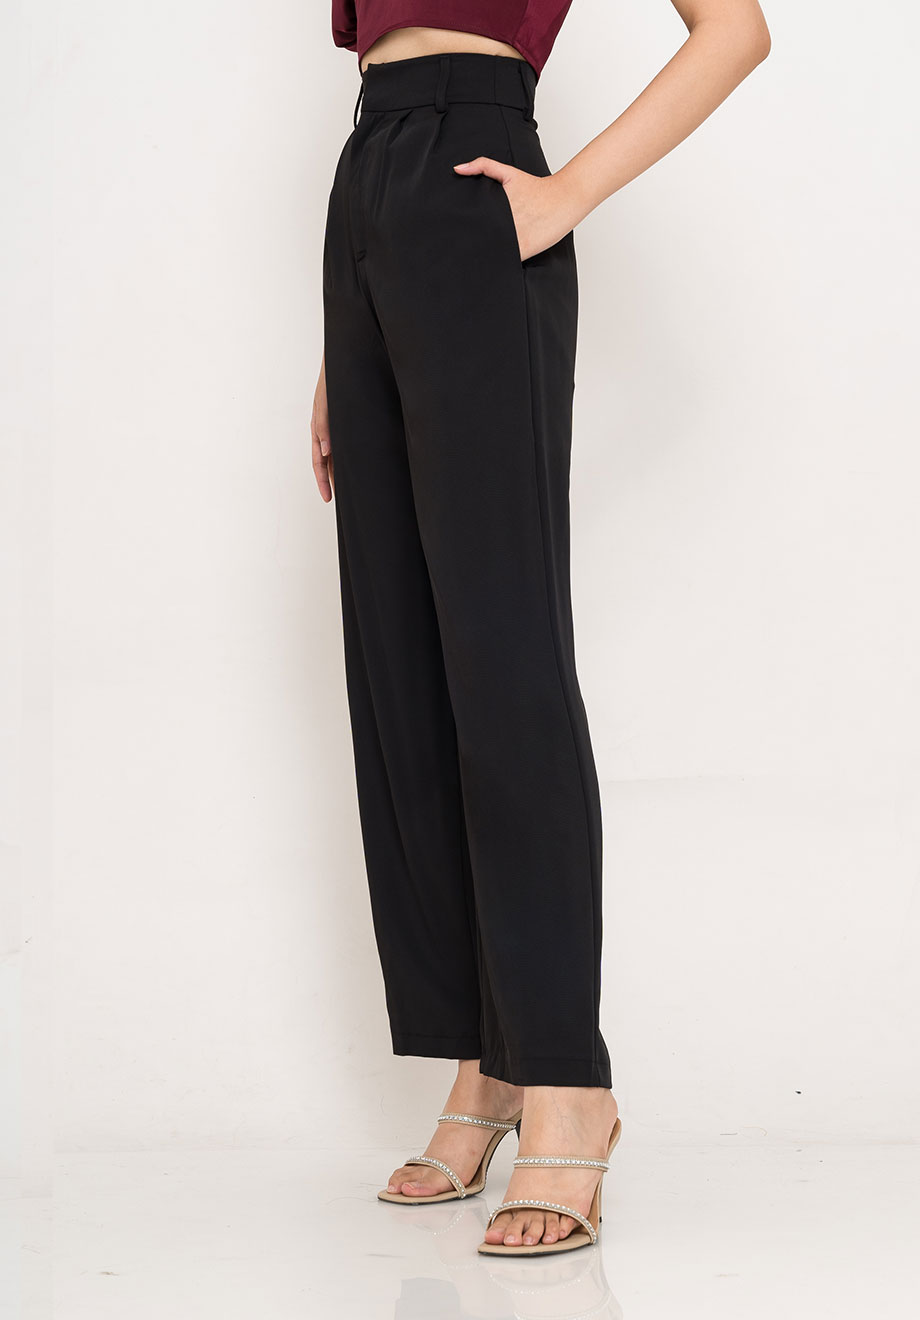 Miller Pants Black - Chocochips | Chocochips Boutique | www.chocochips ...